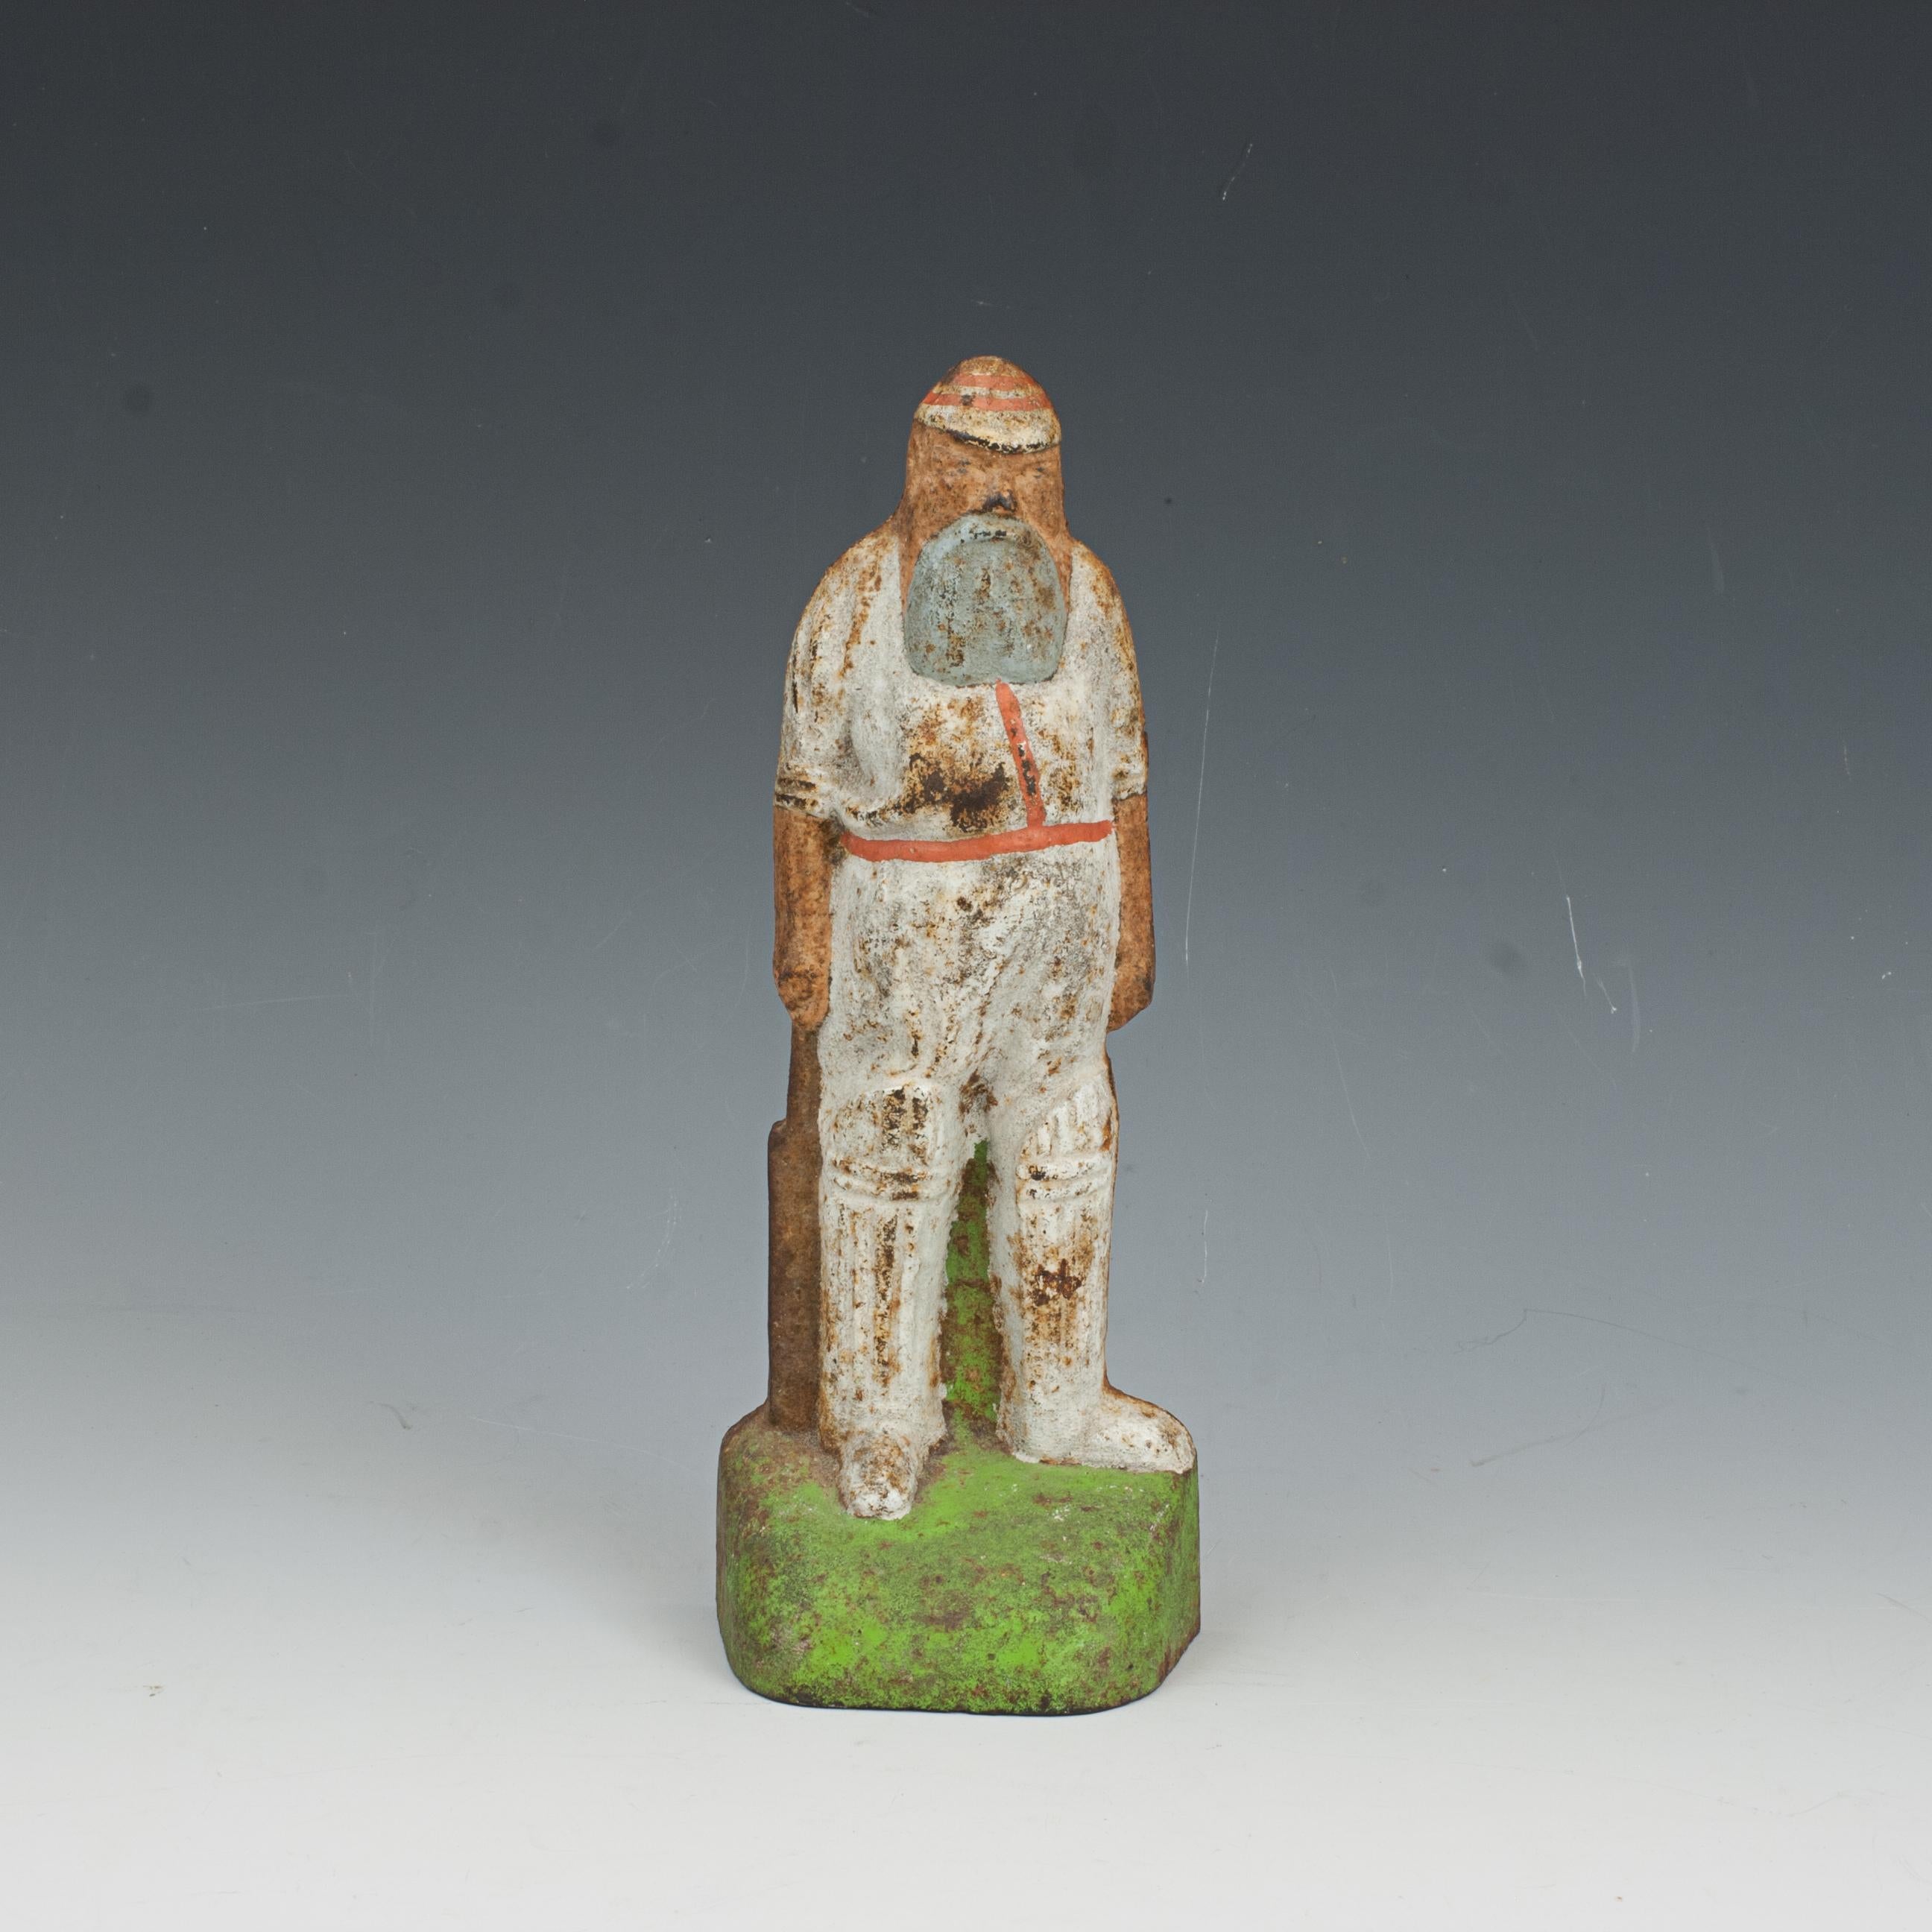 Vintage W.G. Grace Doorstop.
A good rare vintage cast iron cricket doorstop of of W.G. Grace. The caricature figure of Grace sees him in his cricket whites with pads and holding a cricket bat. The doorstop with the majority of original paint but